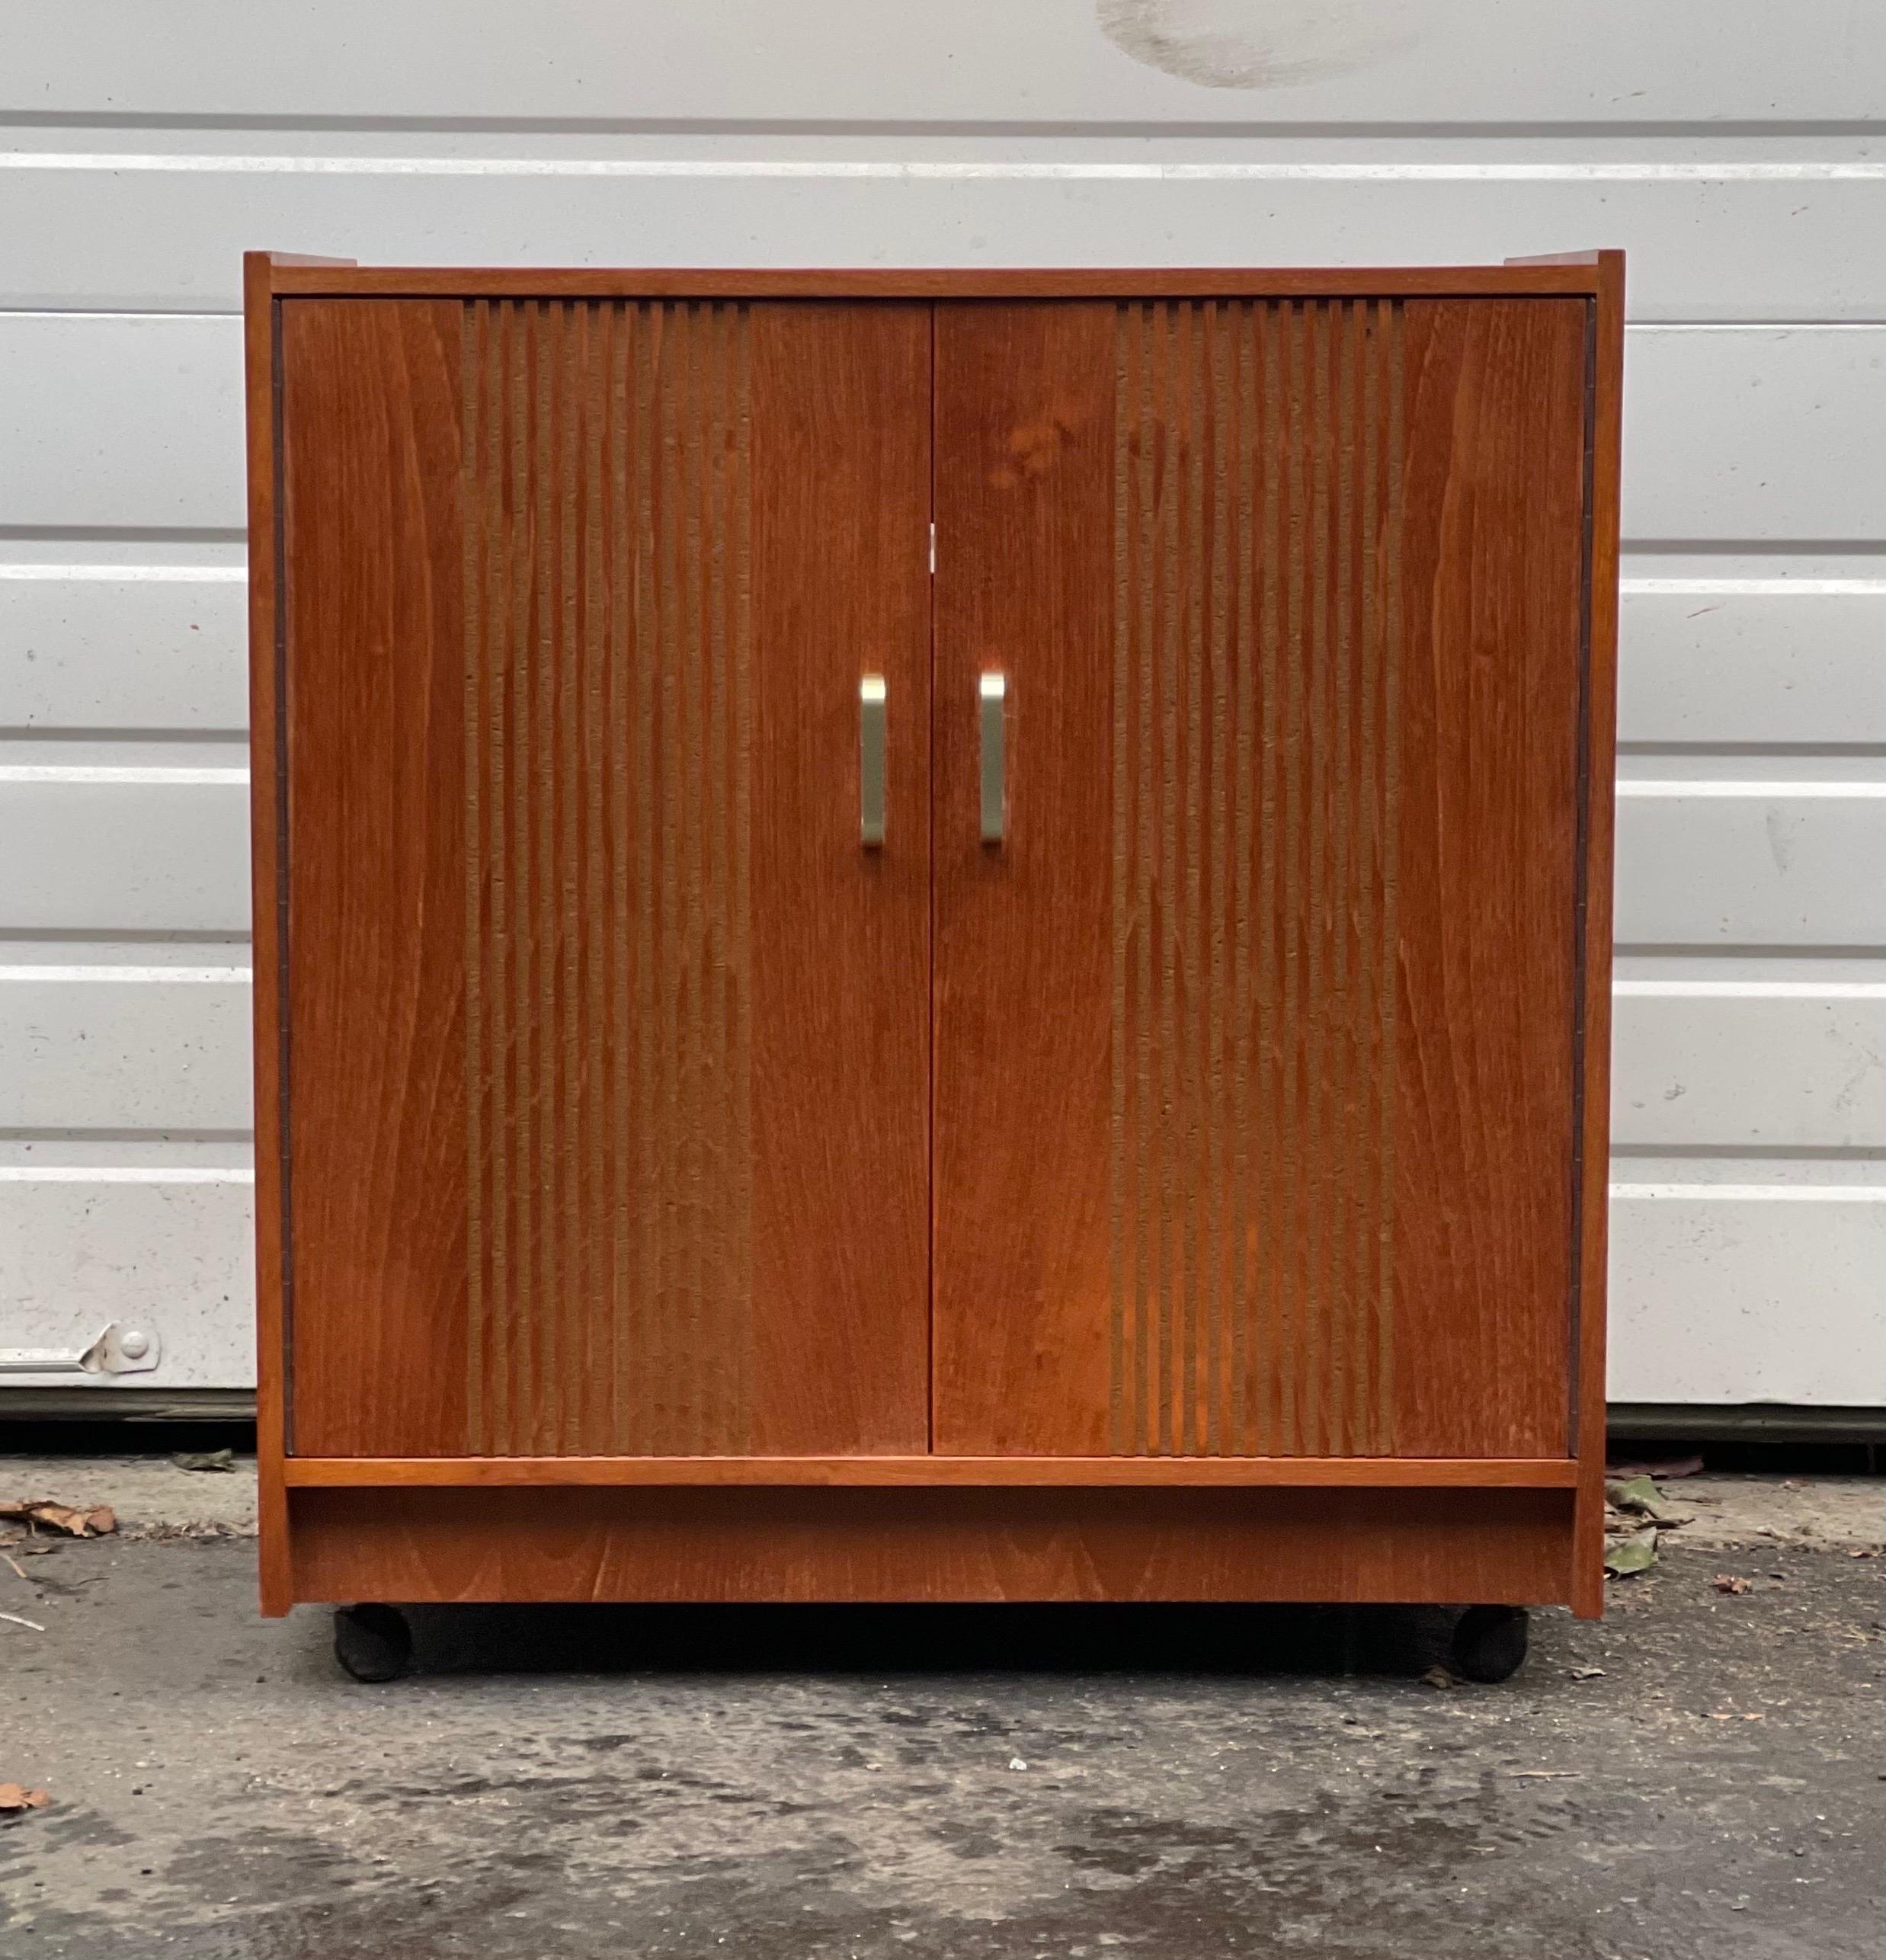 Vintage Mid-Century Modern record cabinet with casters. UK import

Dimensions. 25 W ; 16 D ; 27 H.